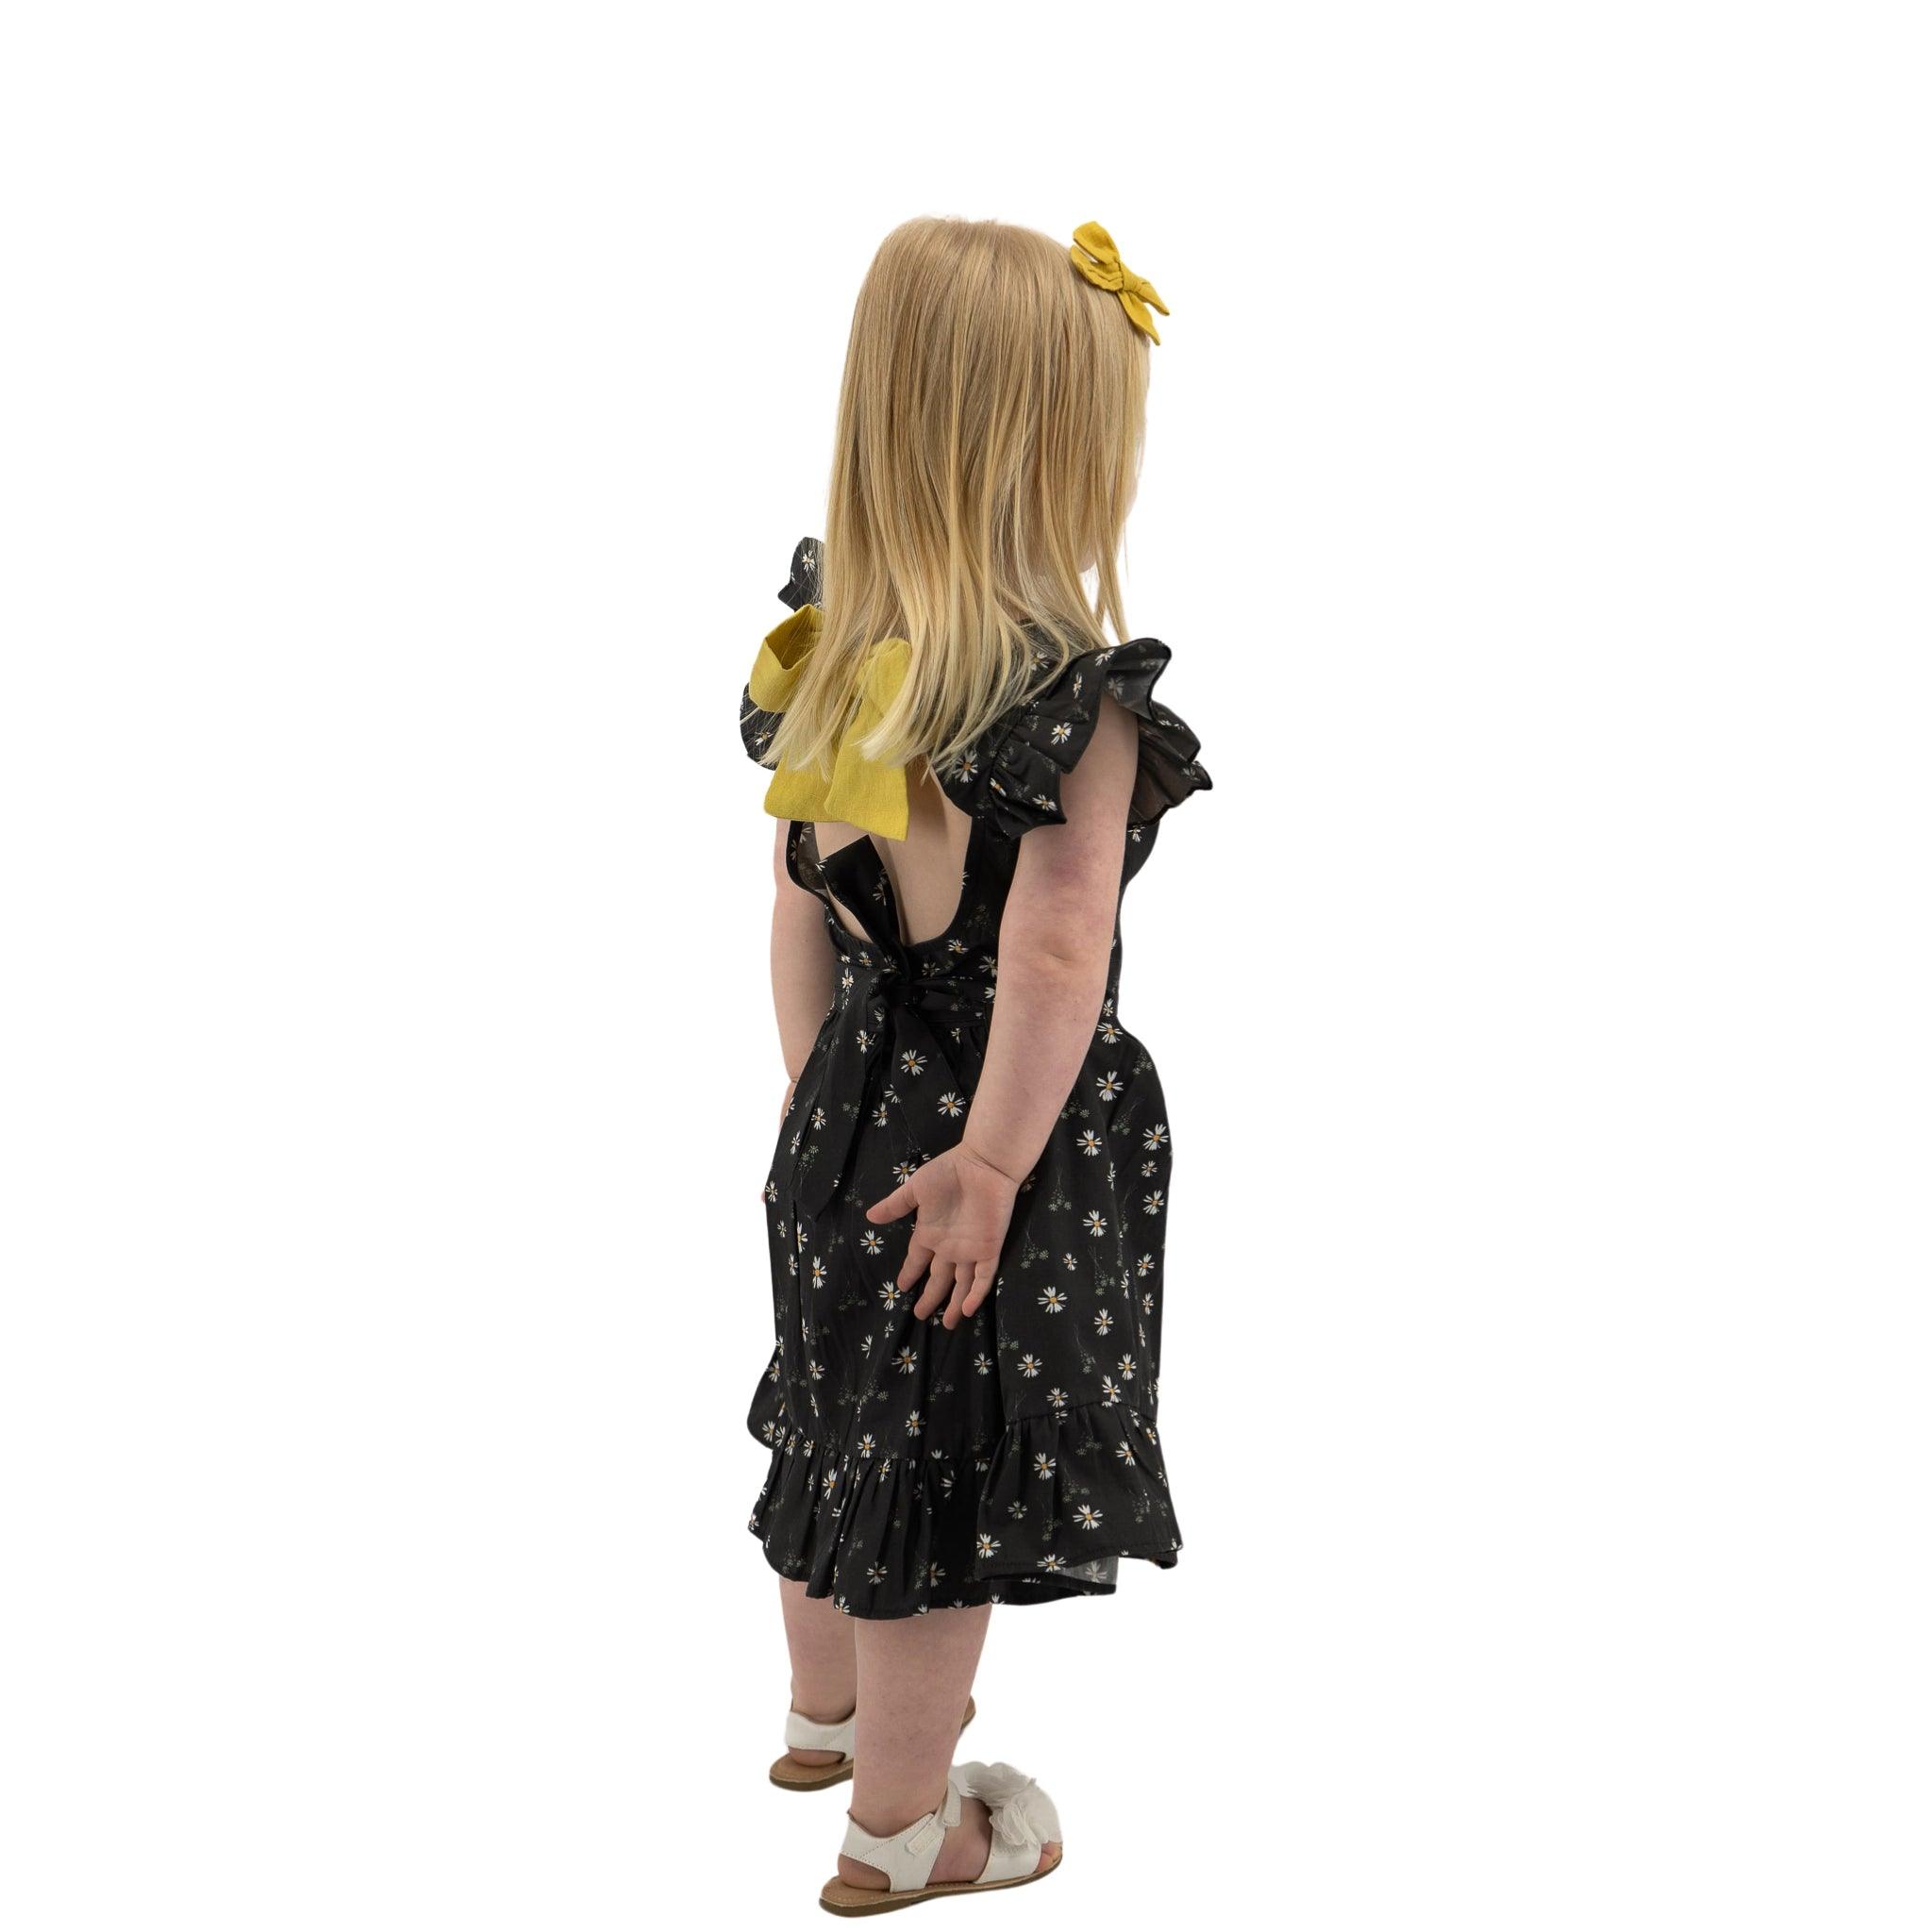 Young girl with blonde hair wearing a Karee Petite Blossom Black Cotton Dress and white shoes, standing in profile against a white background.